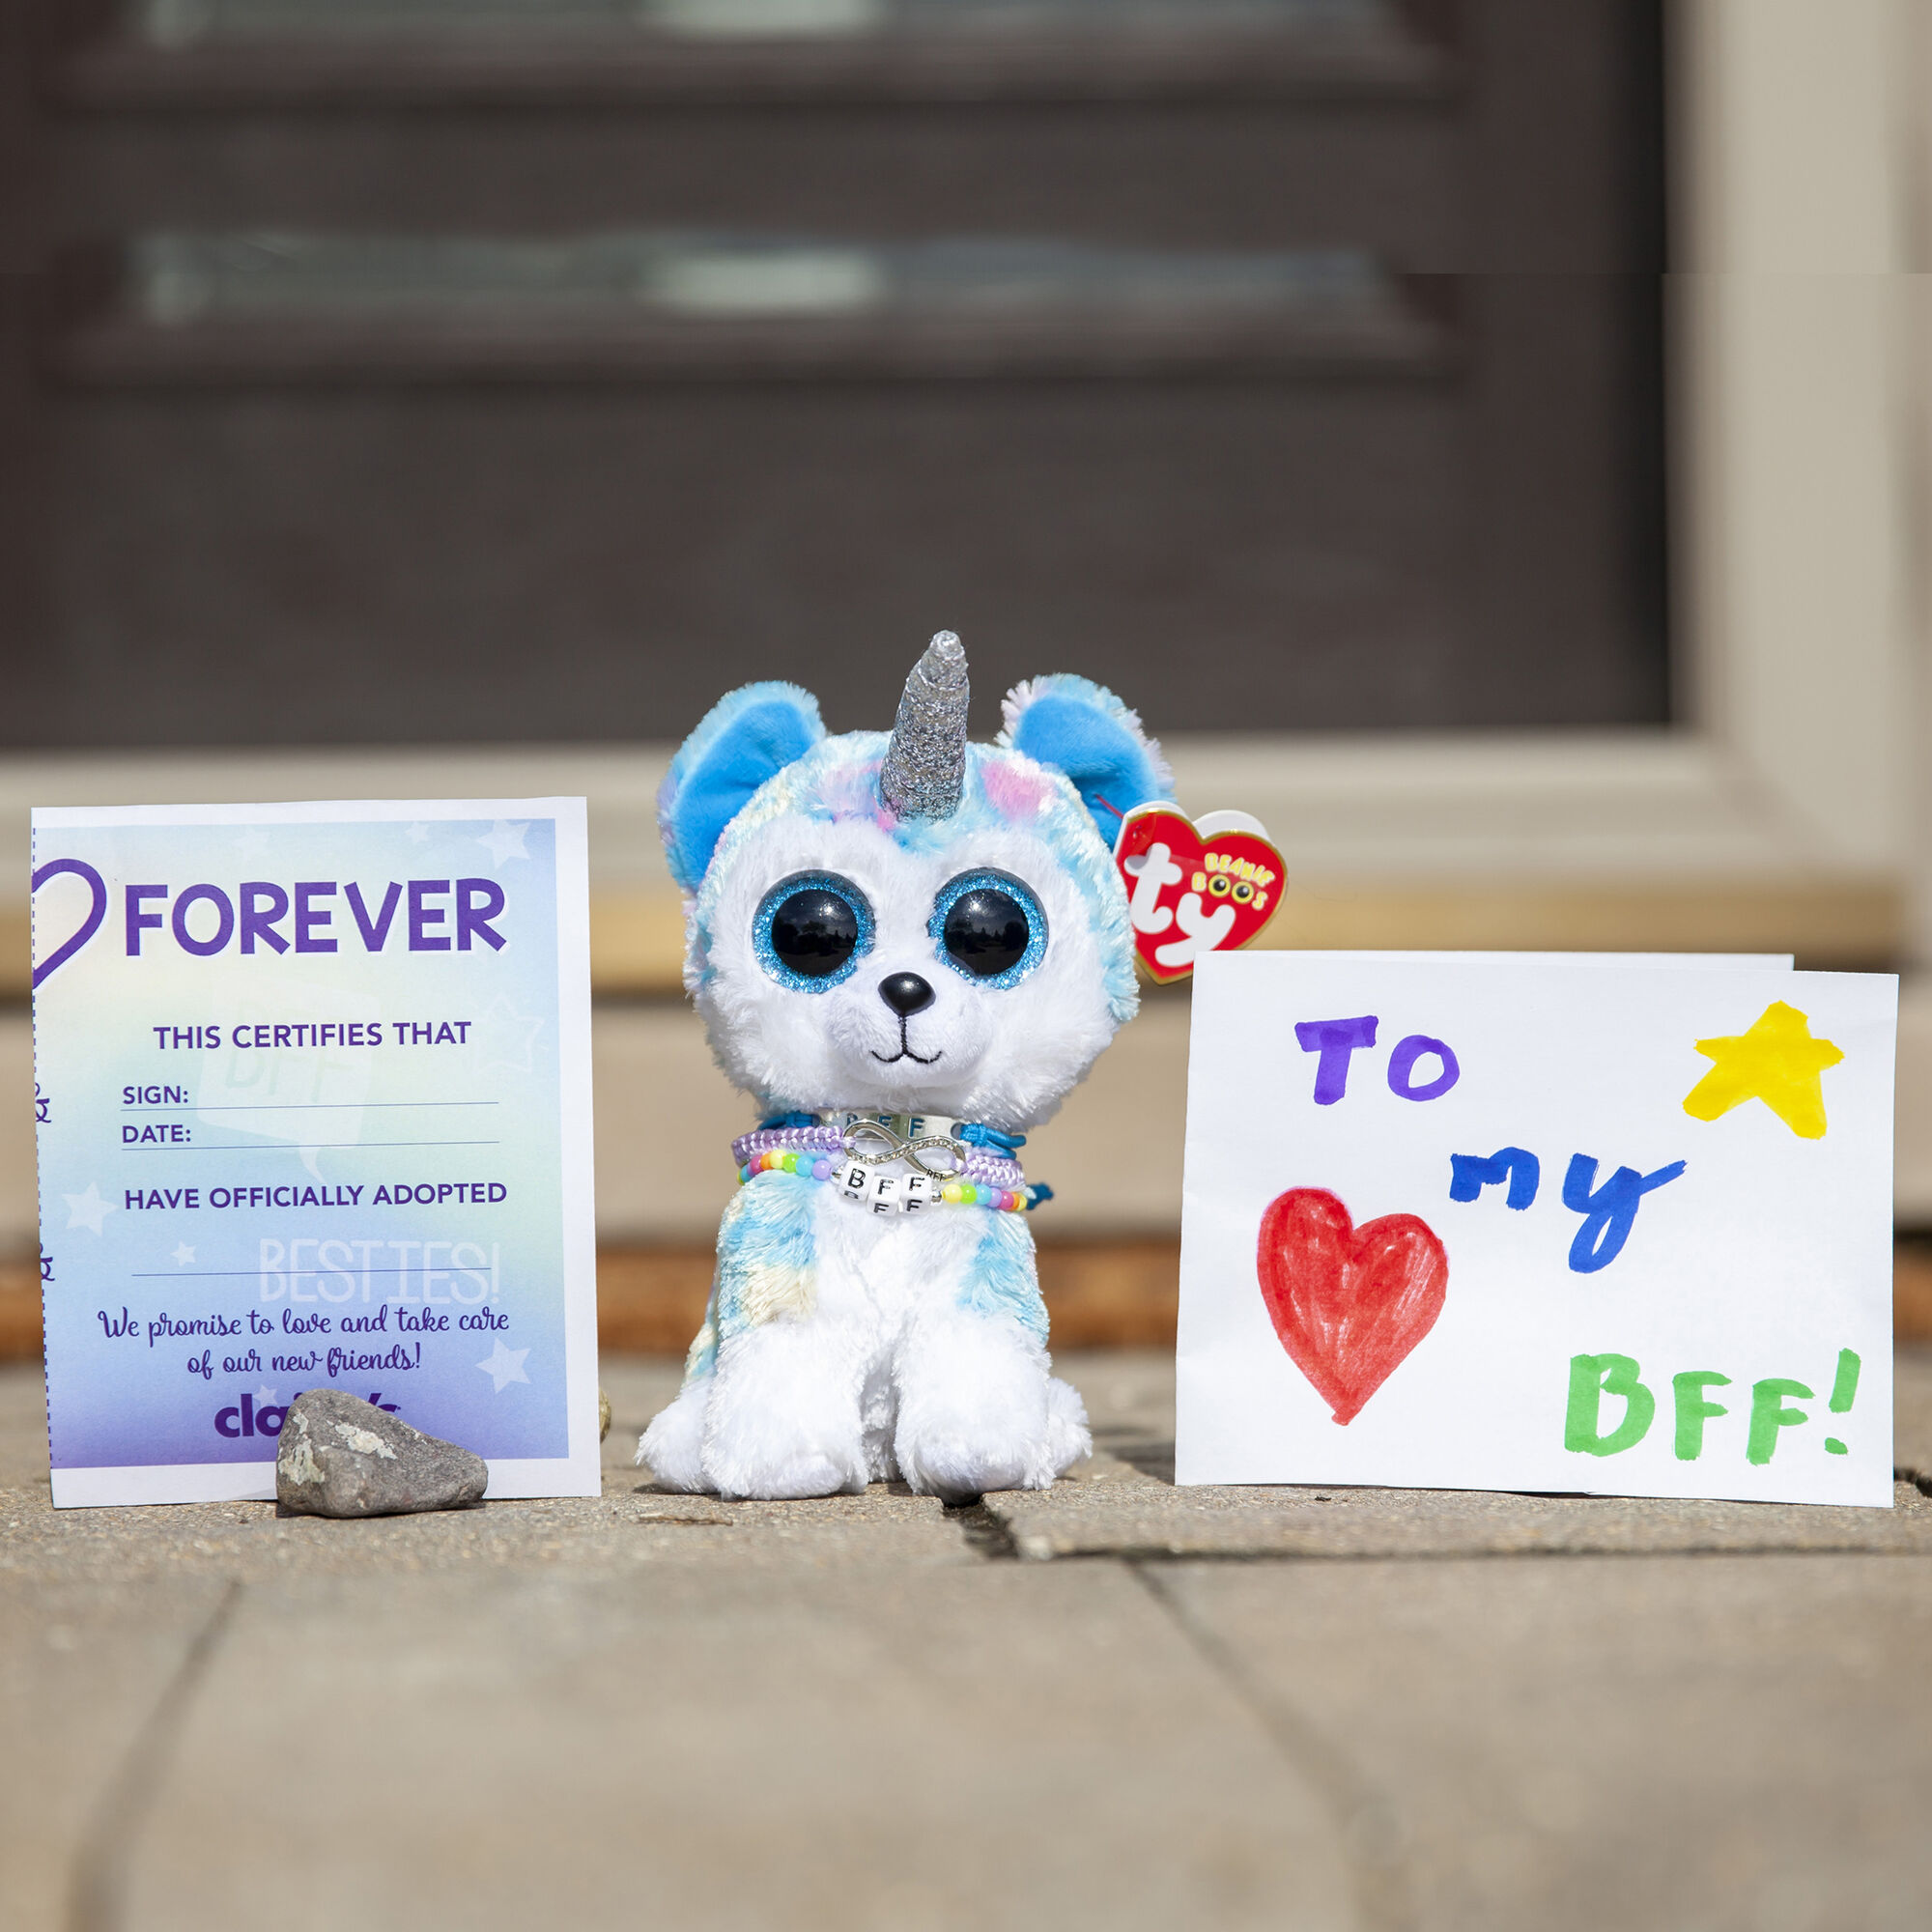 Tussendoortje stilte hypotheek Adopt a Ty Beanie Boo for Your Bestie! | Claire's